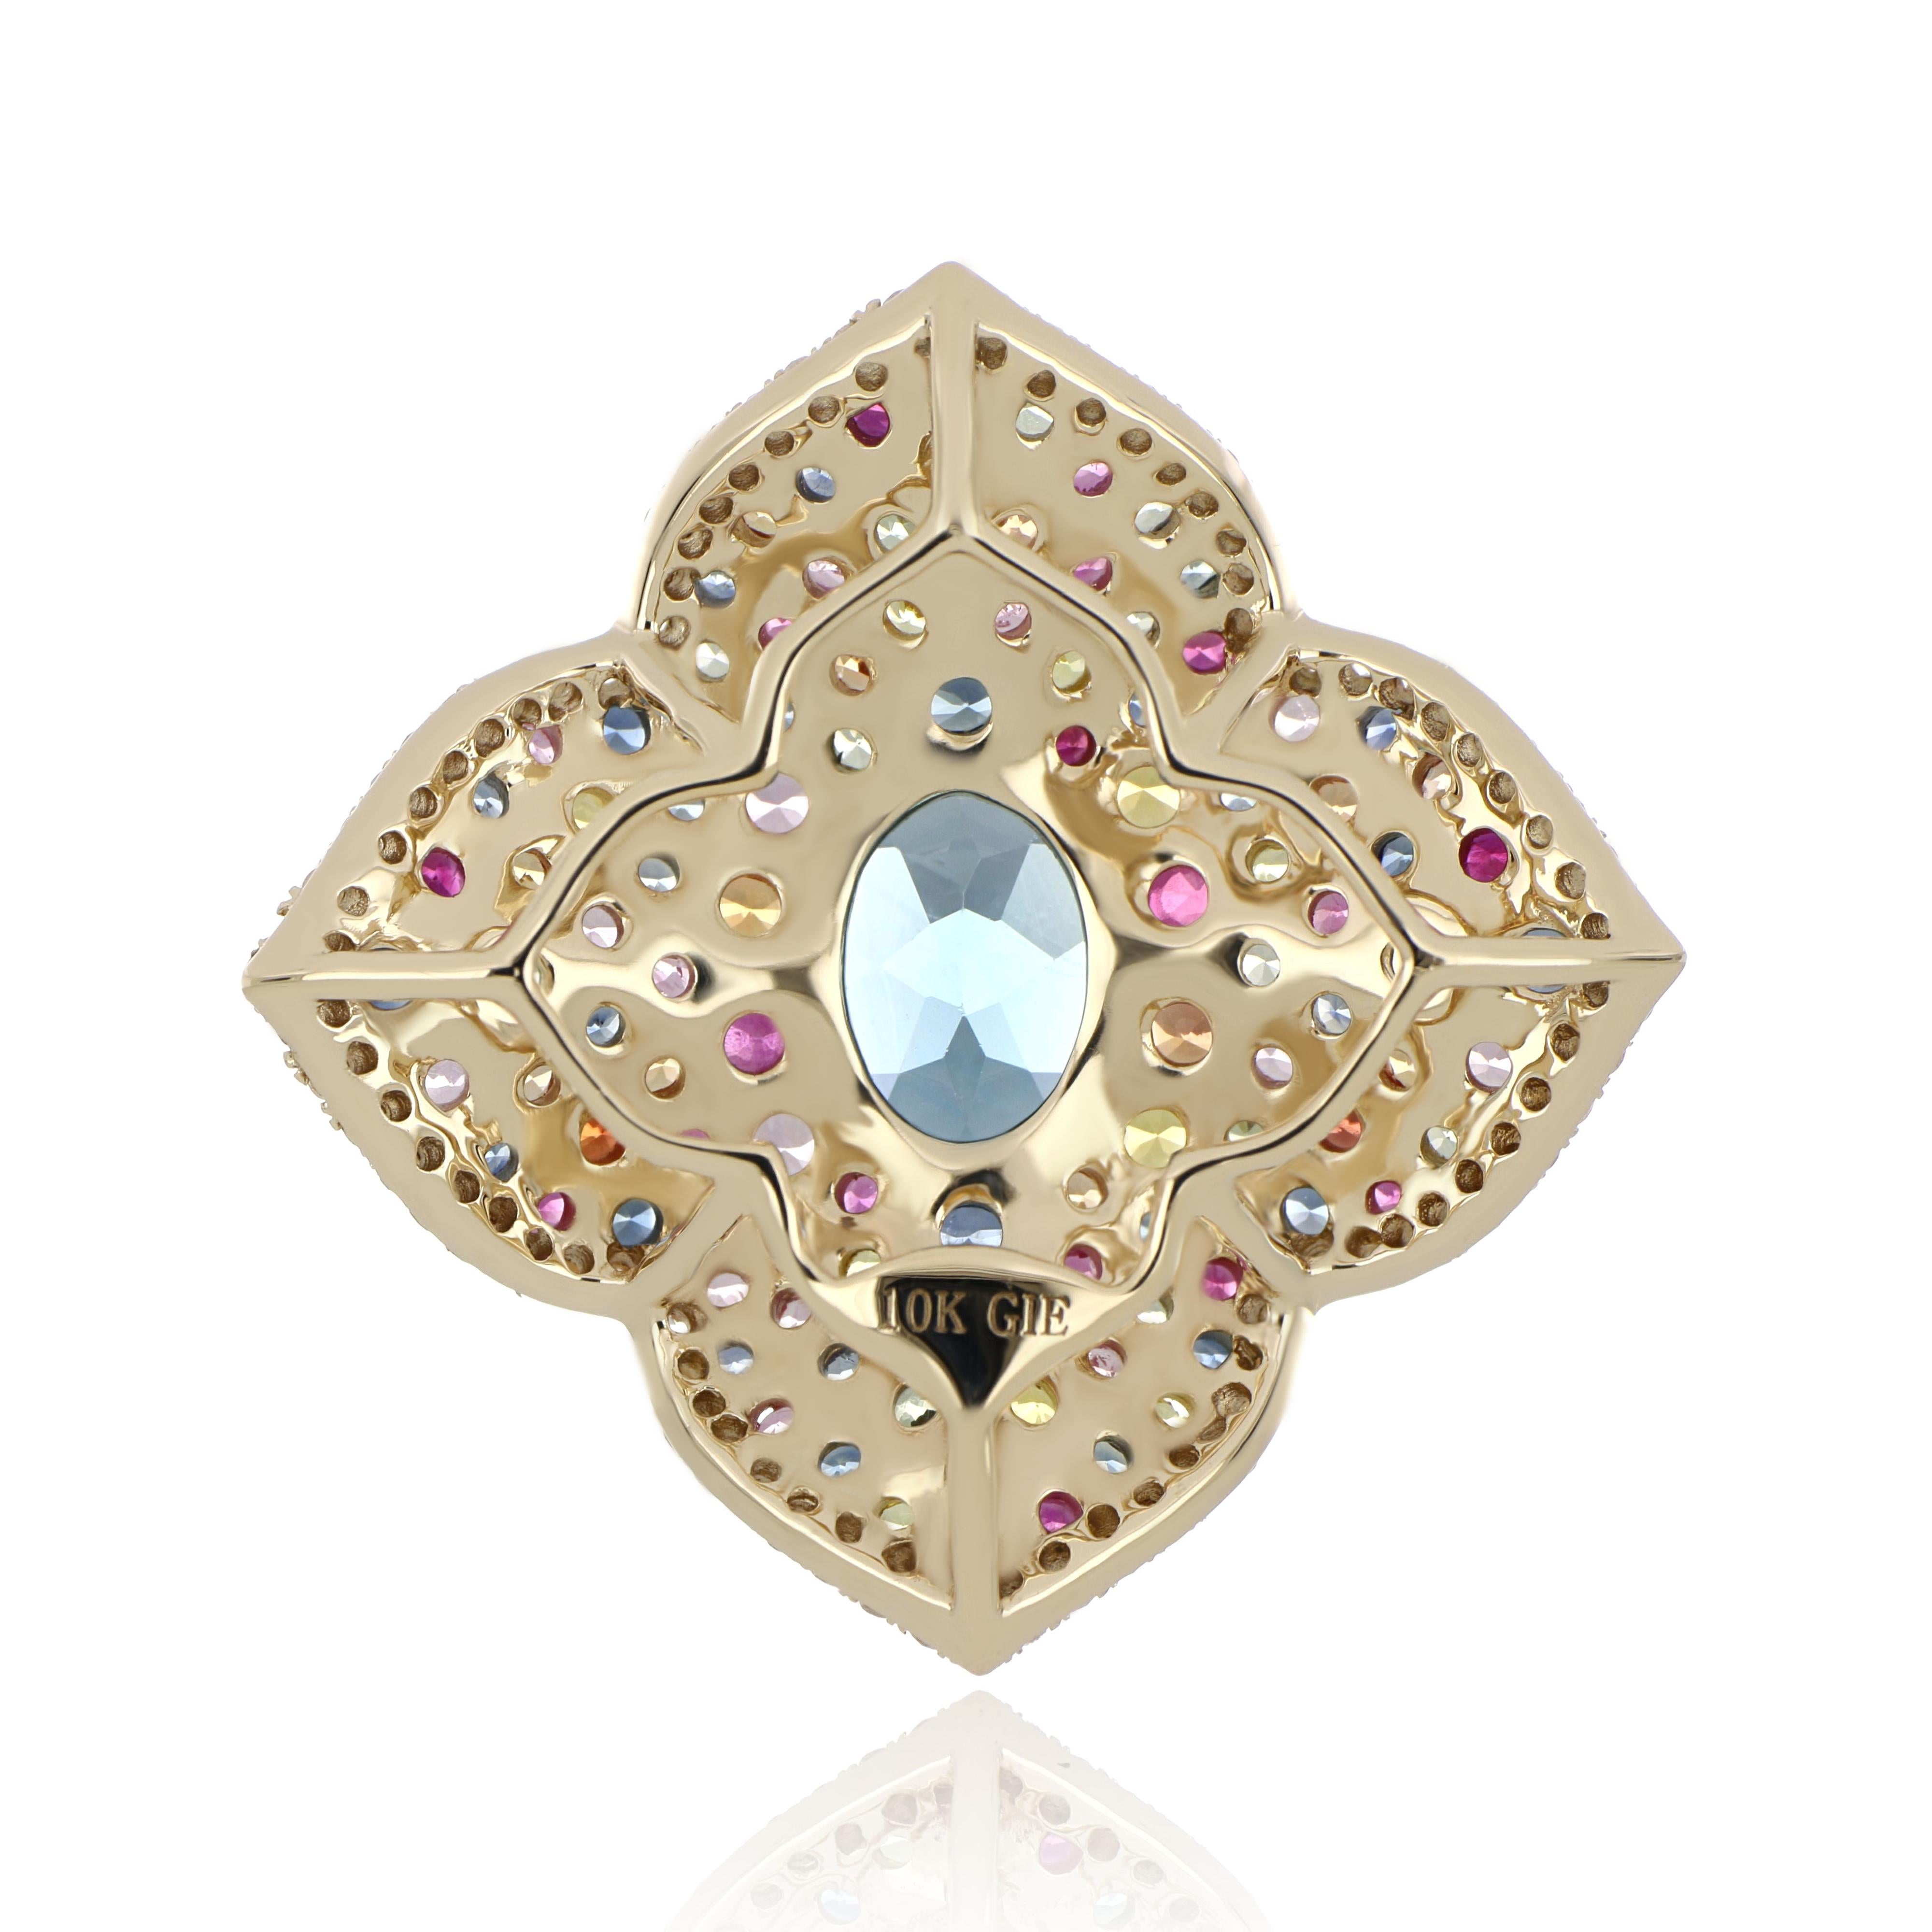 This collection is inspired by the Mughal Era and their influences on the architecture of the times.
The main motifs of this collection are derived from some of the most famous monuments of those times.
This Beautiful Pendant is studded with 1.50